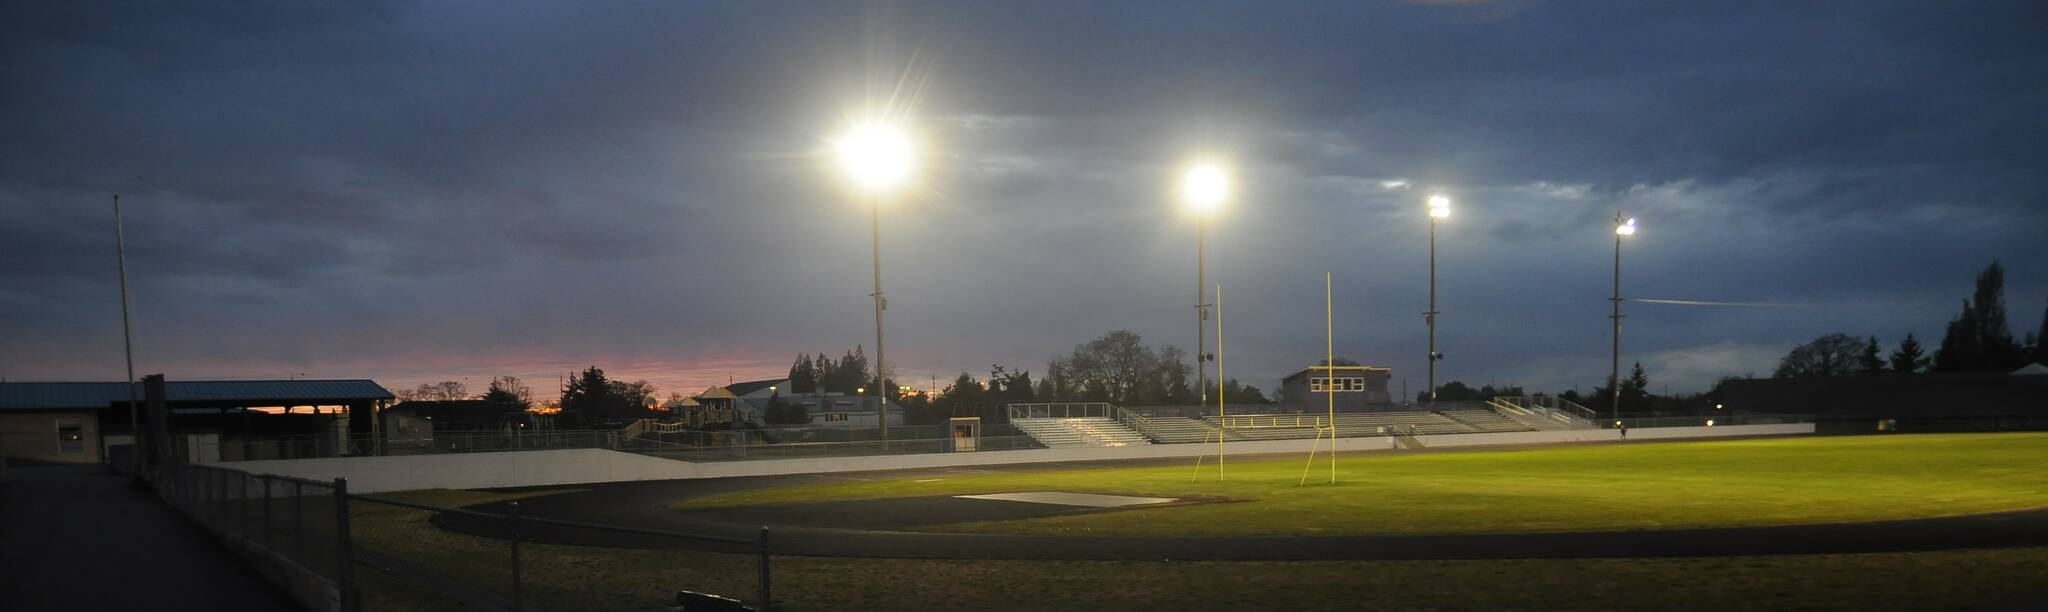 Michael Dashiell/Olympic Peninsula News Group
The Sequim football field sits empty during a Salute to Seniors event on April 17, 2020. The stadium and field will be named and dedicated at a ceremony before tonight's Sequim-Bainbridge football game.